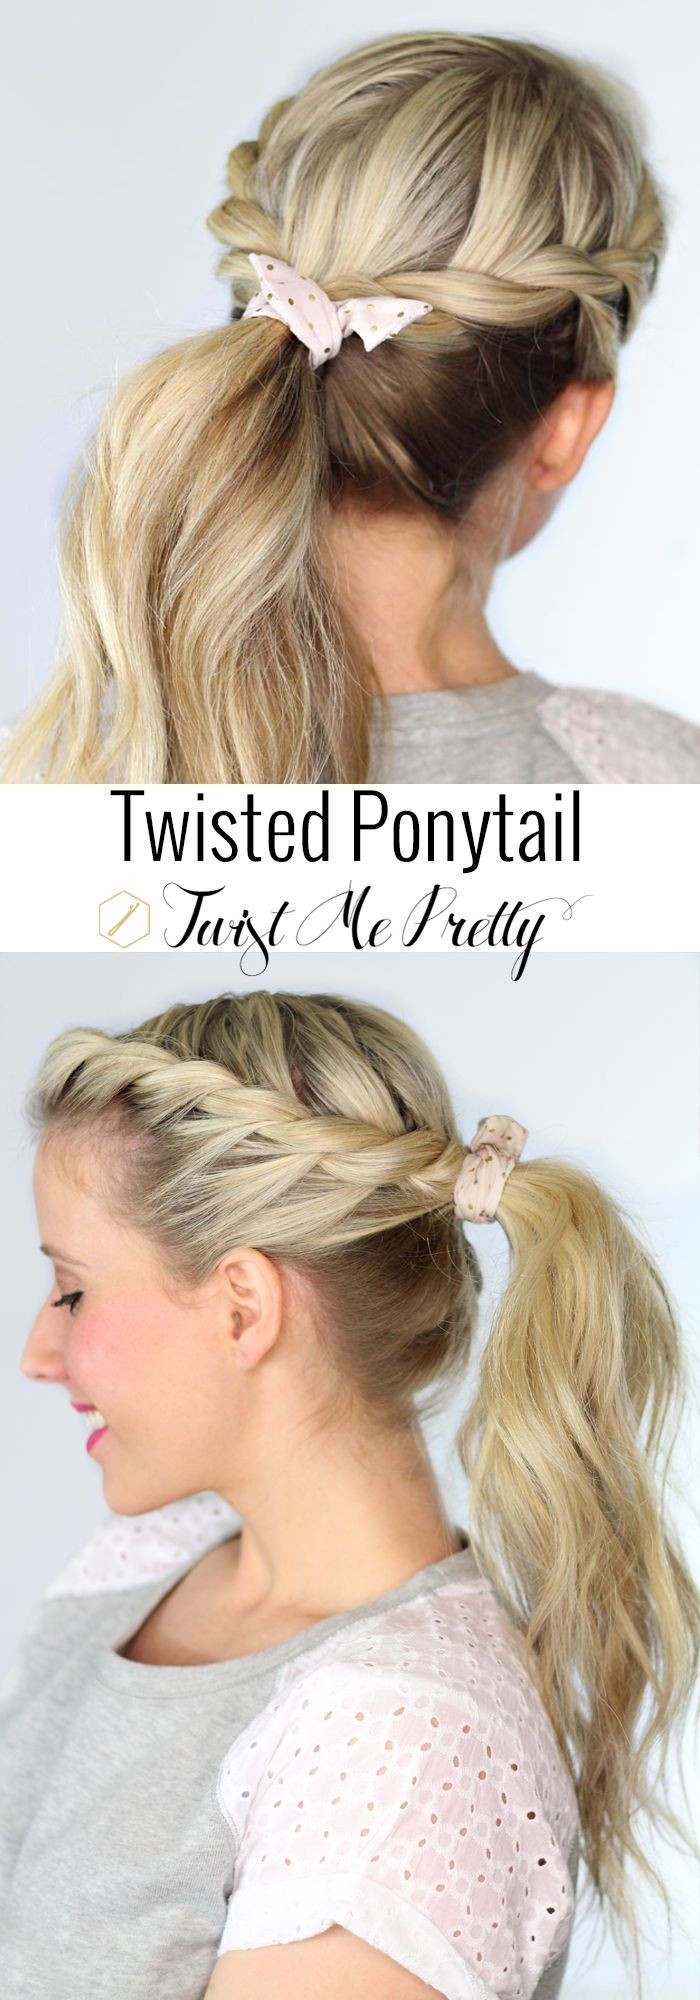 This Twisted Ponytail Hairstyle is So Fresh and Absolutely Perfect for Spring!